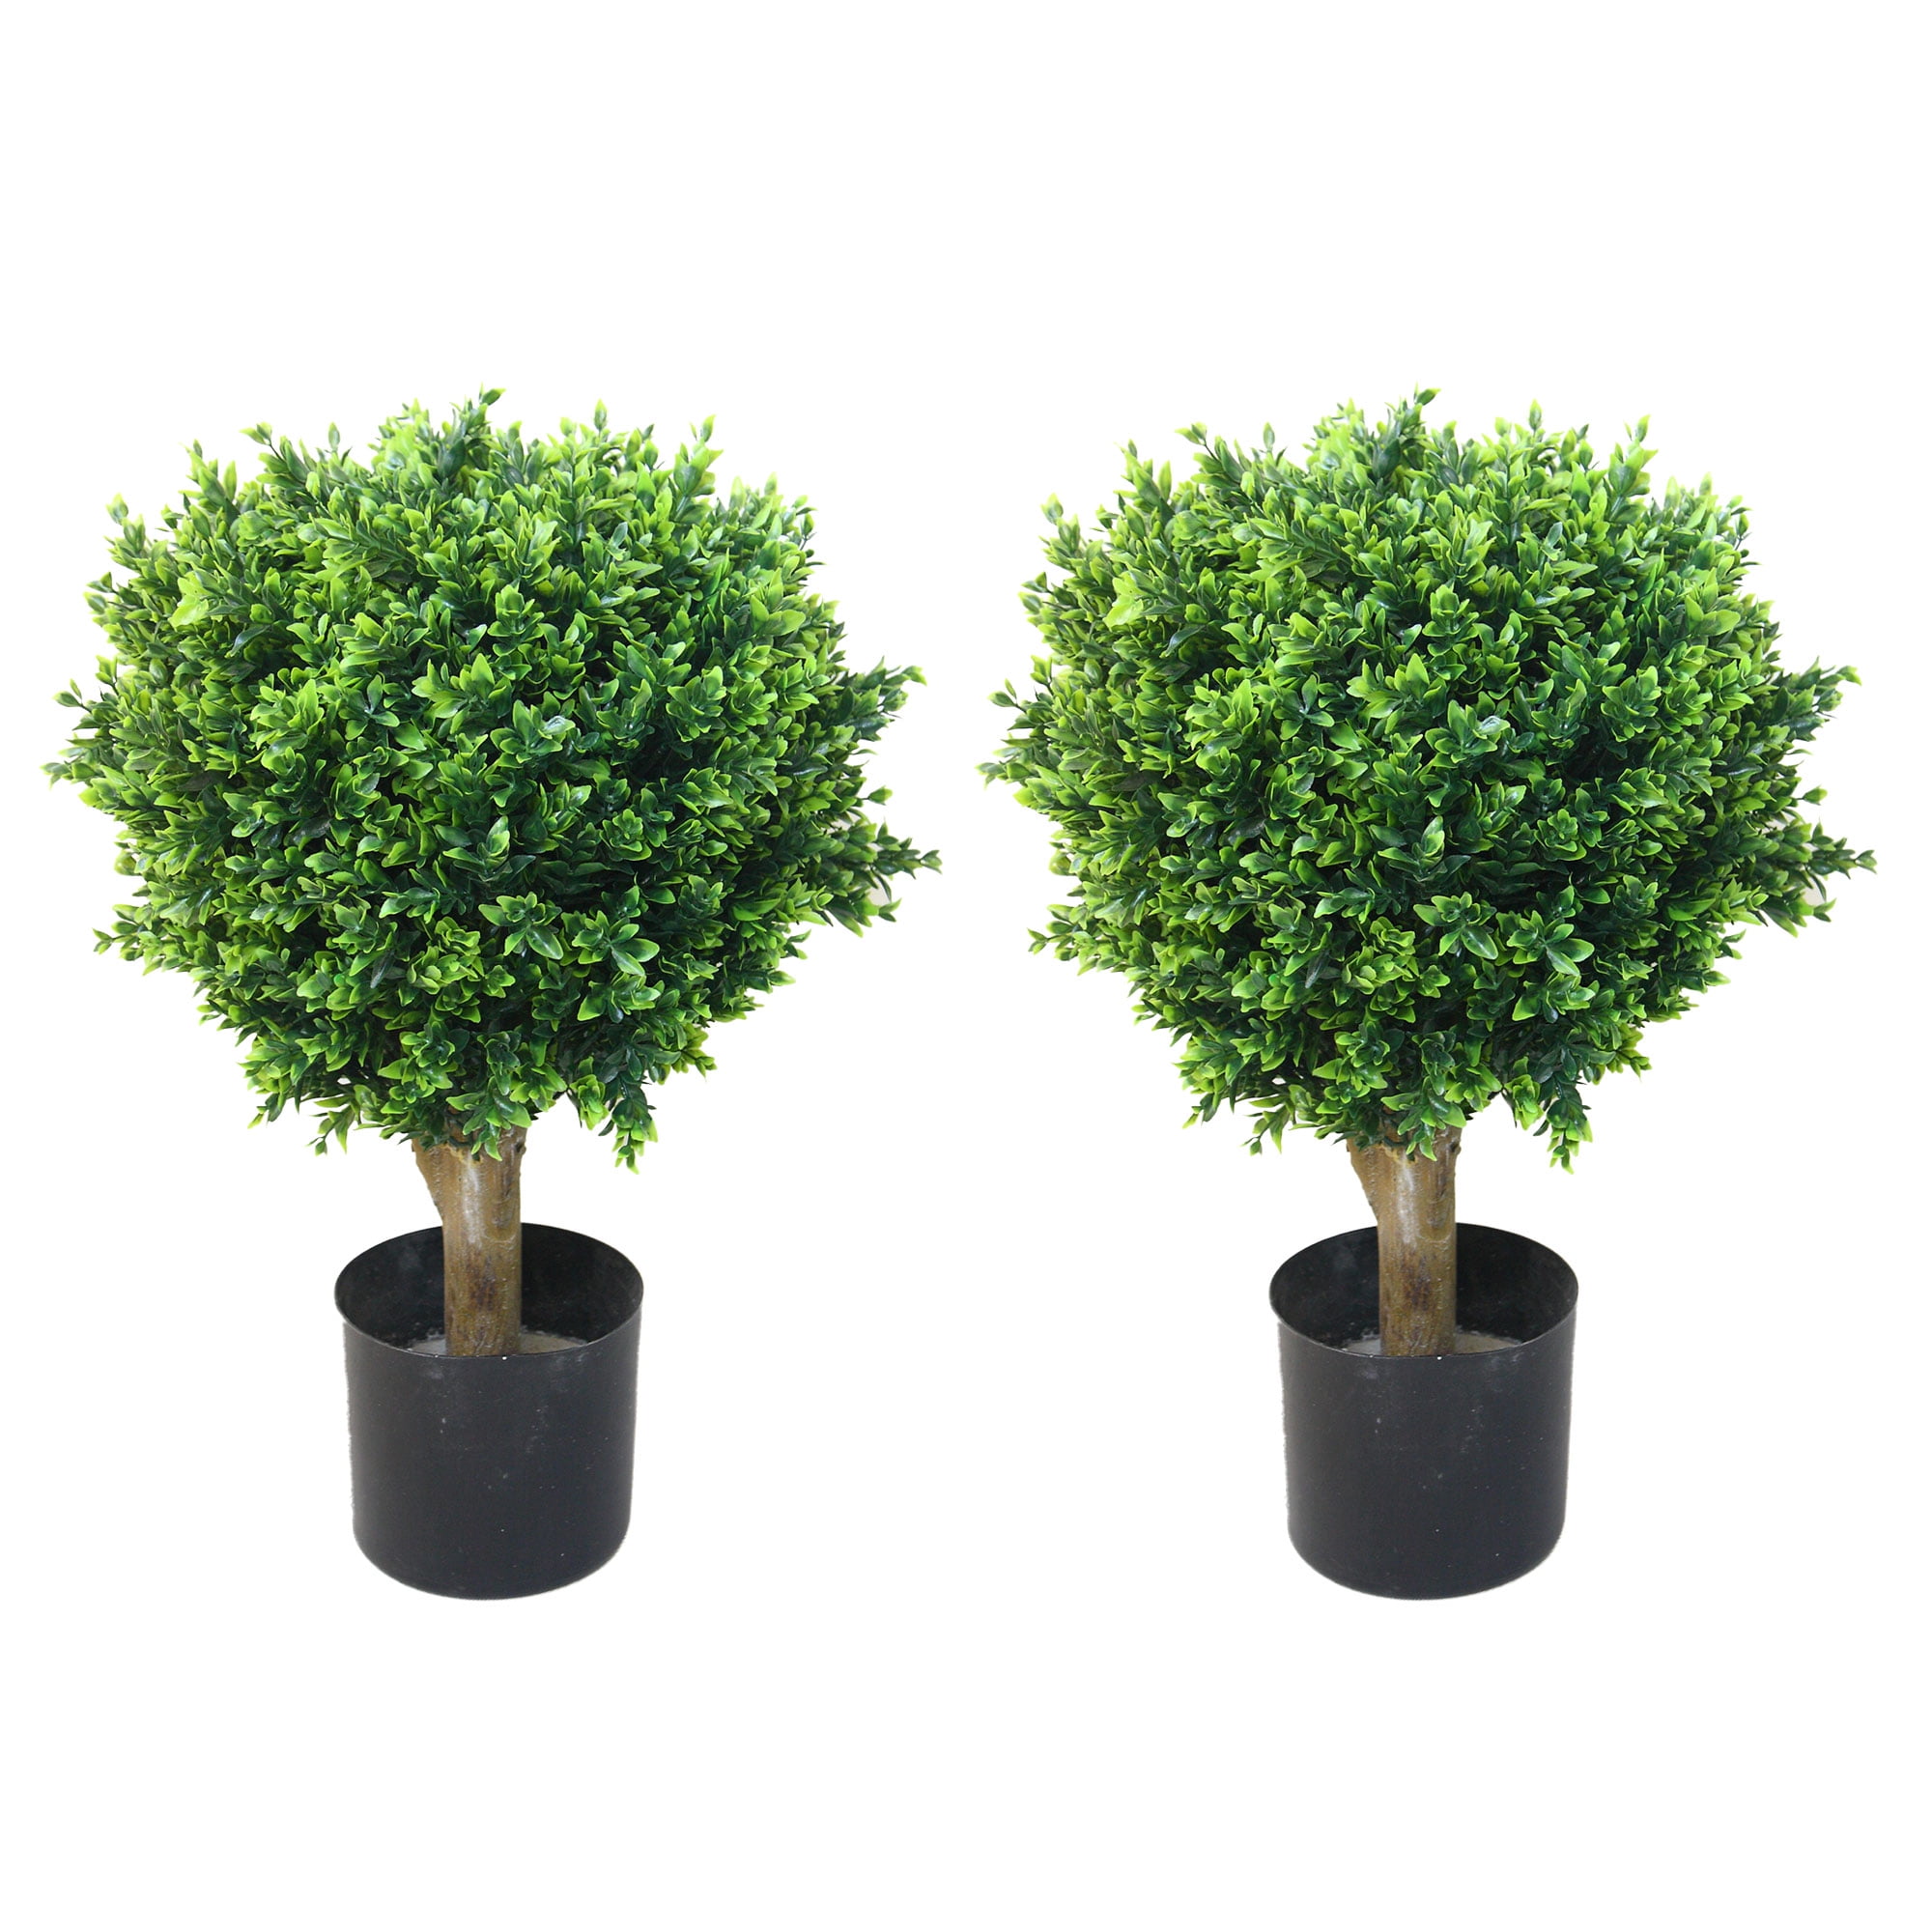 Pair of Round Artificial Topiary Trees Plant Pots Colourful Home Decor Ornaments 